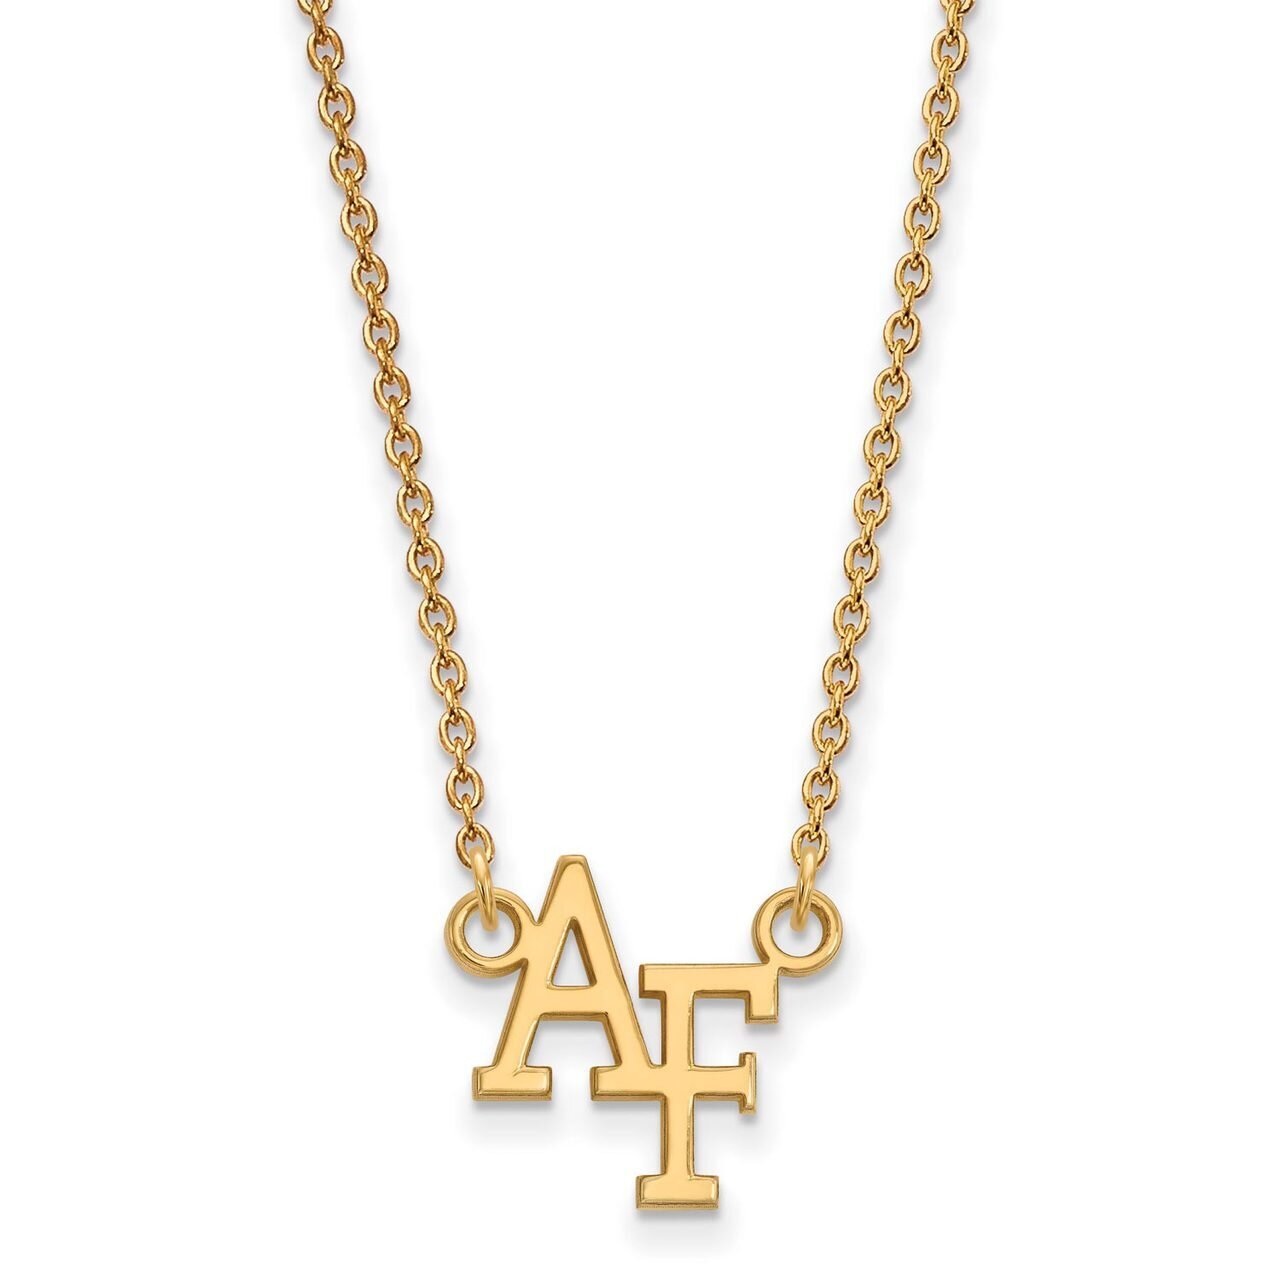 United States Air Force Academy Small Pendant with Chain Necklace Gold-plated Silver GP011USA-18